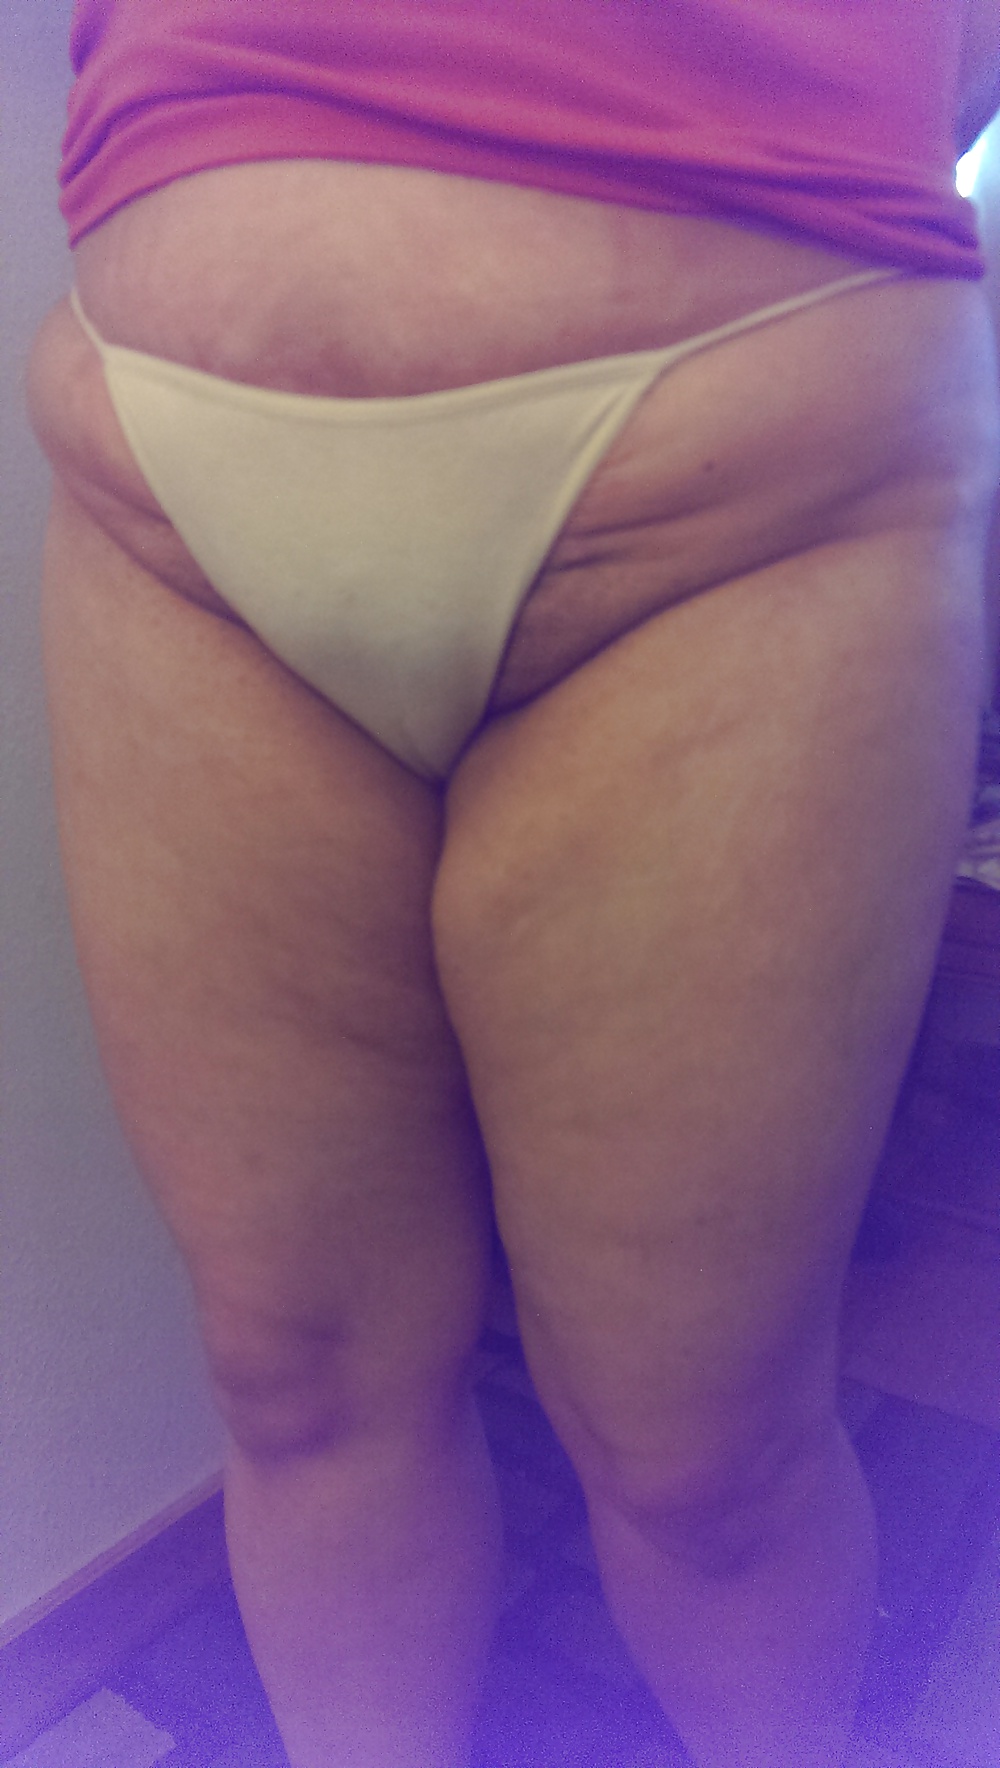 Wifes big ass and little pantys